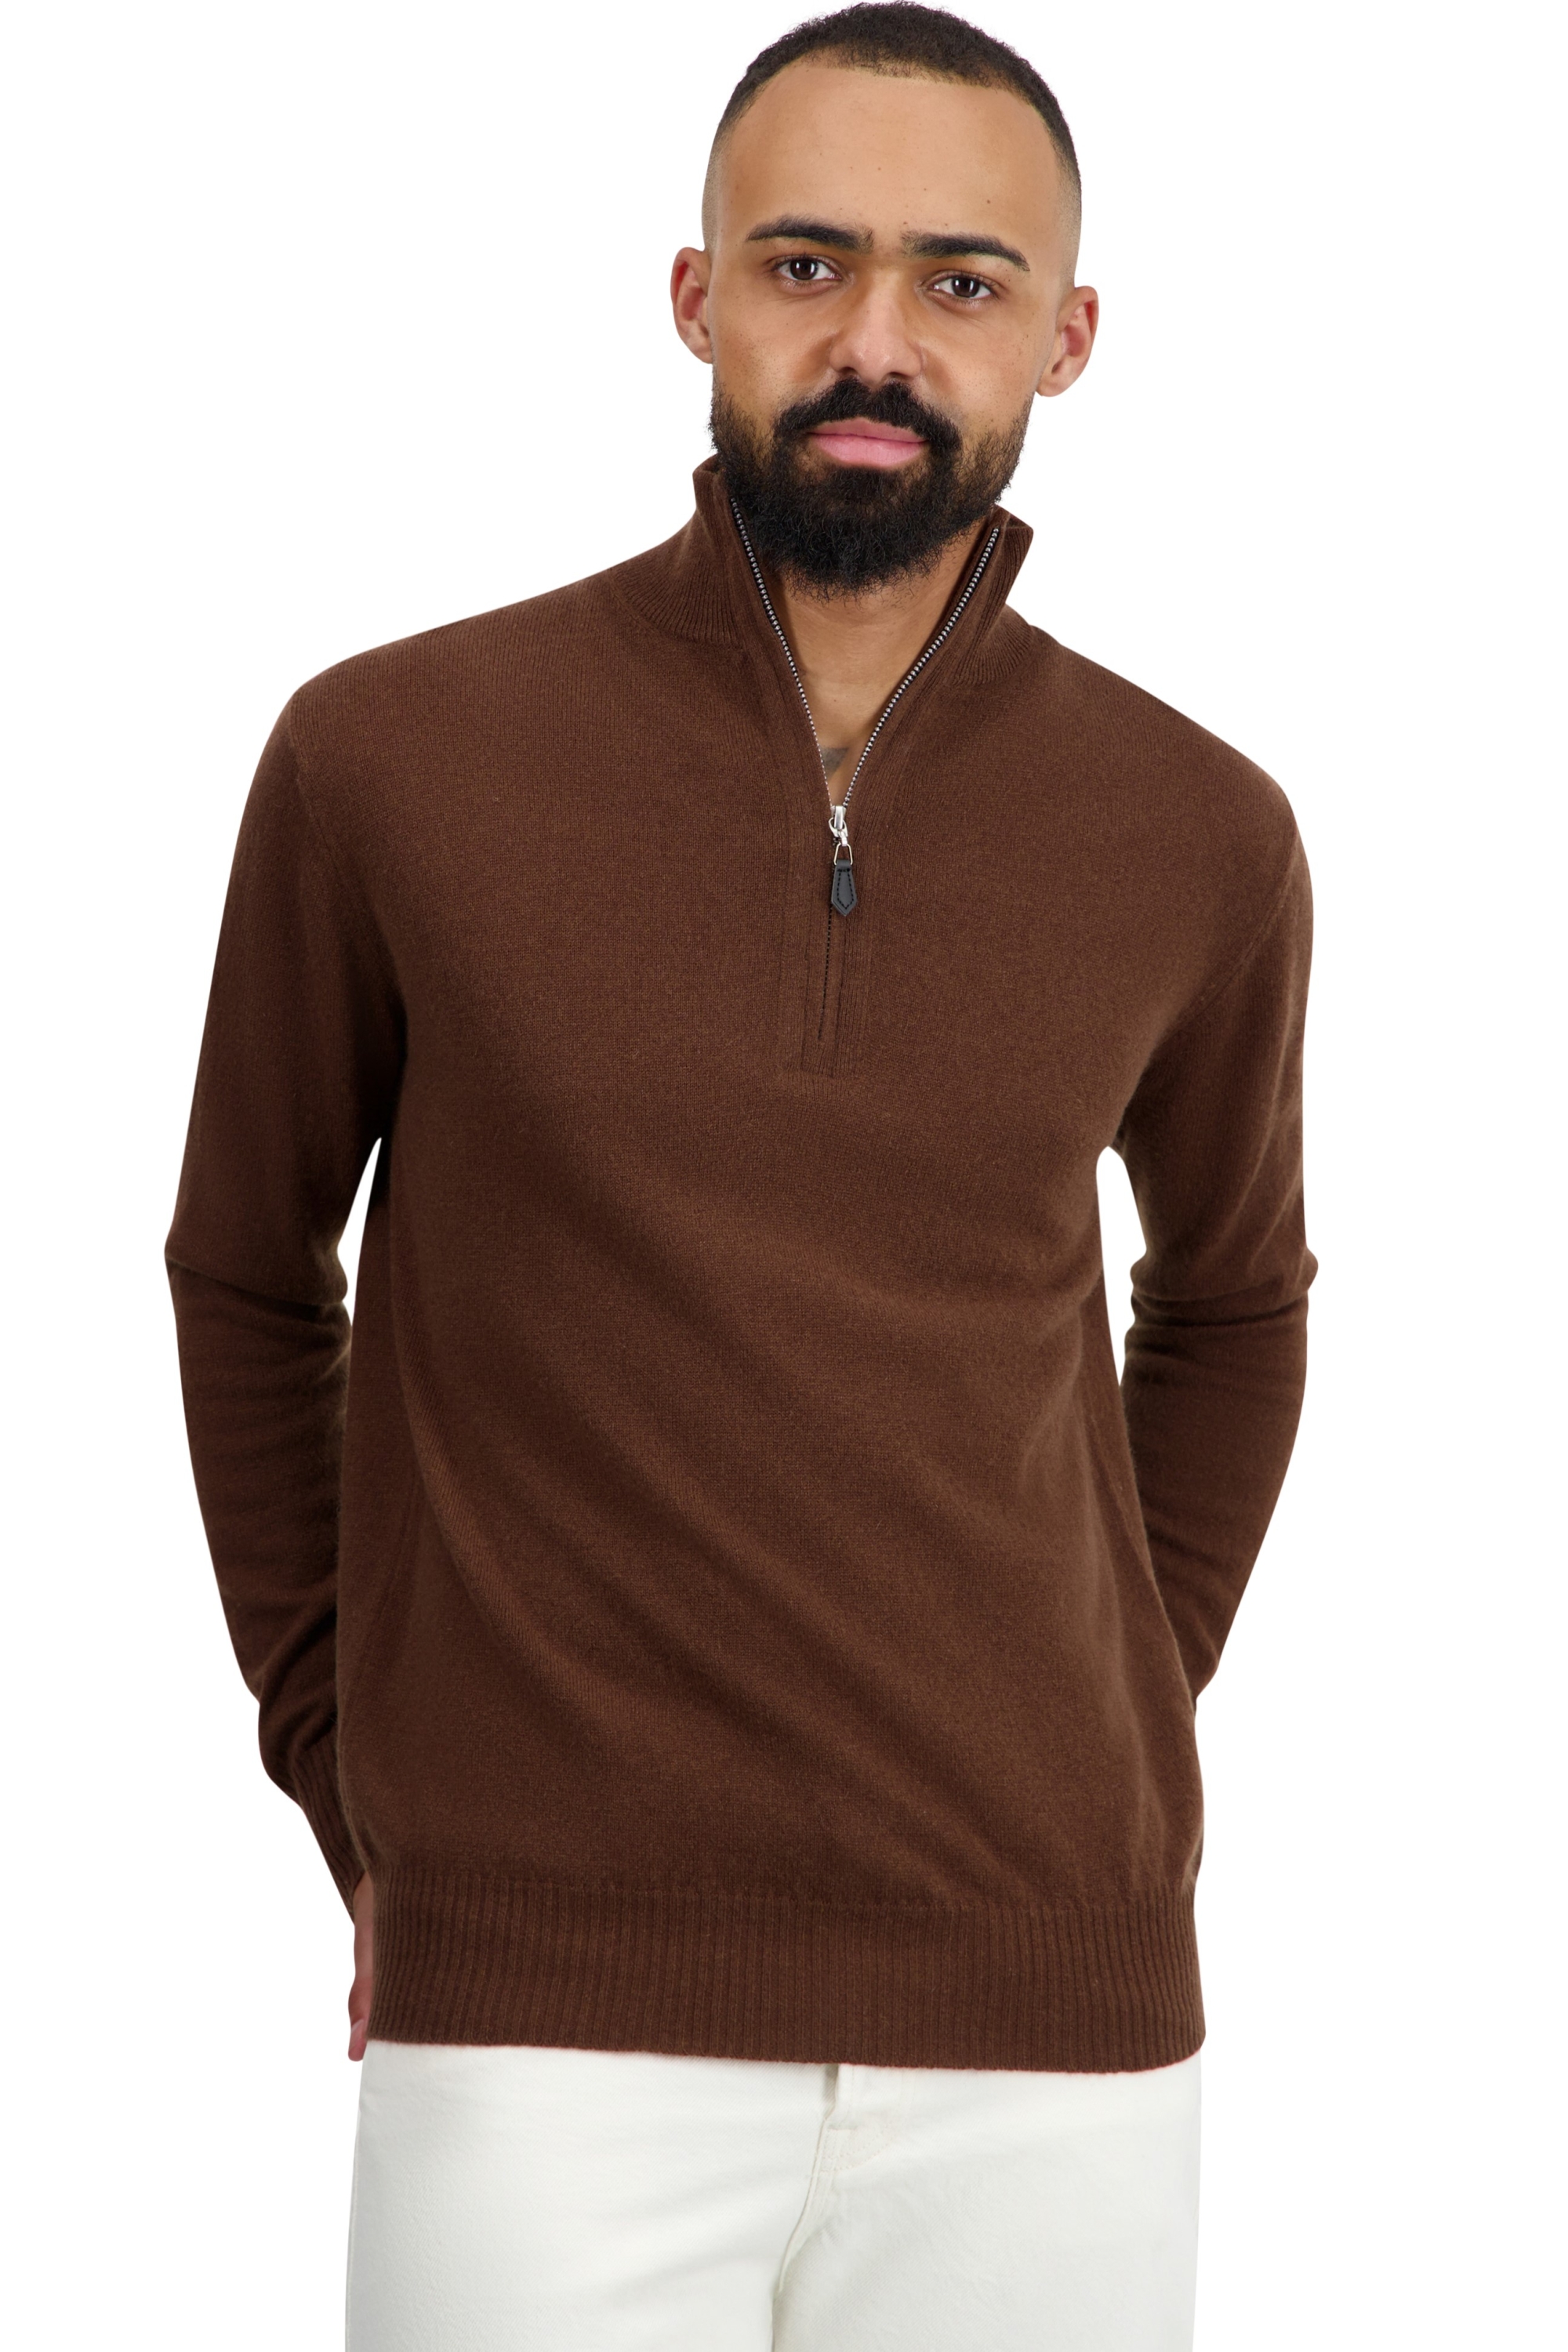 Cashmere men basic sweaters at low prices toulon first dark camel 3xl